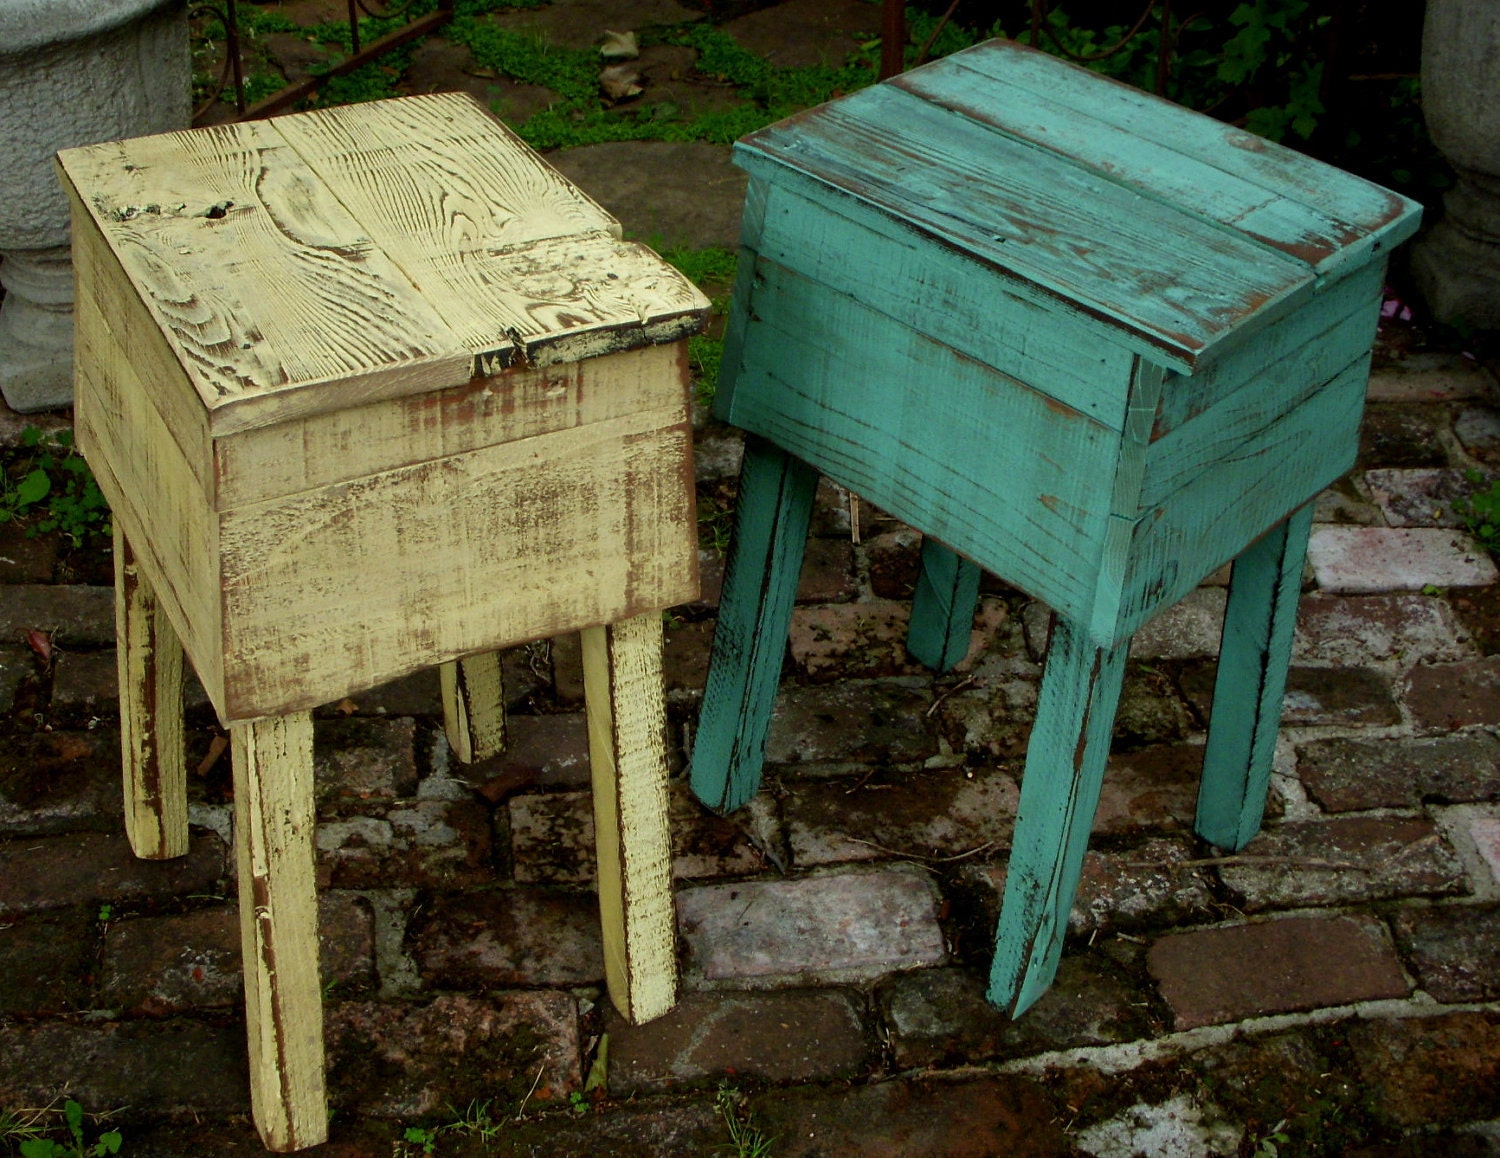 Country Cottage Furniture